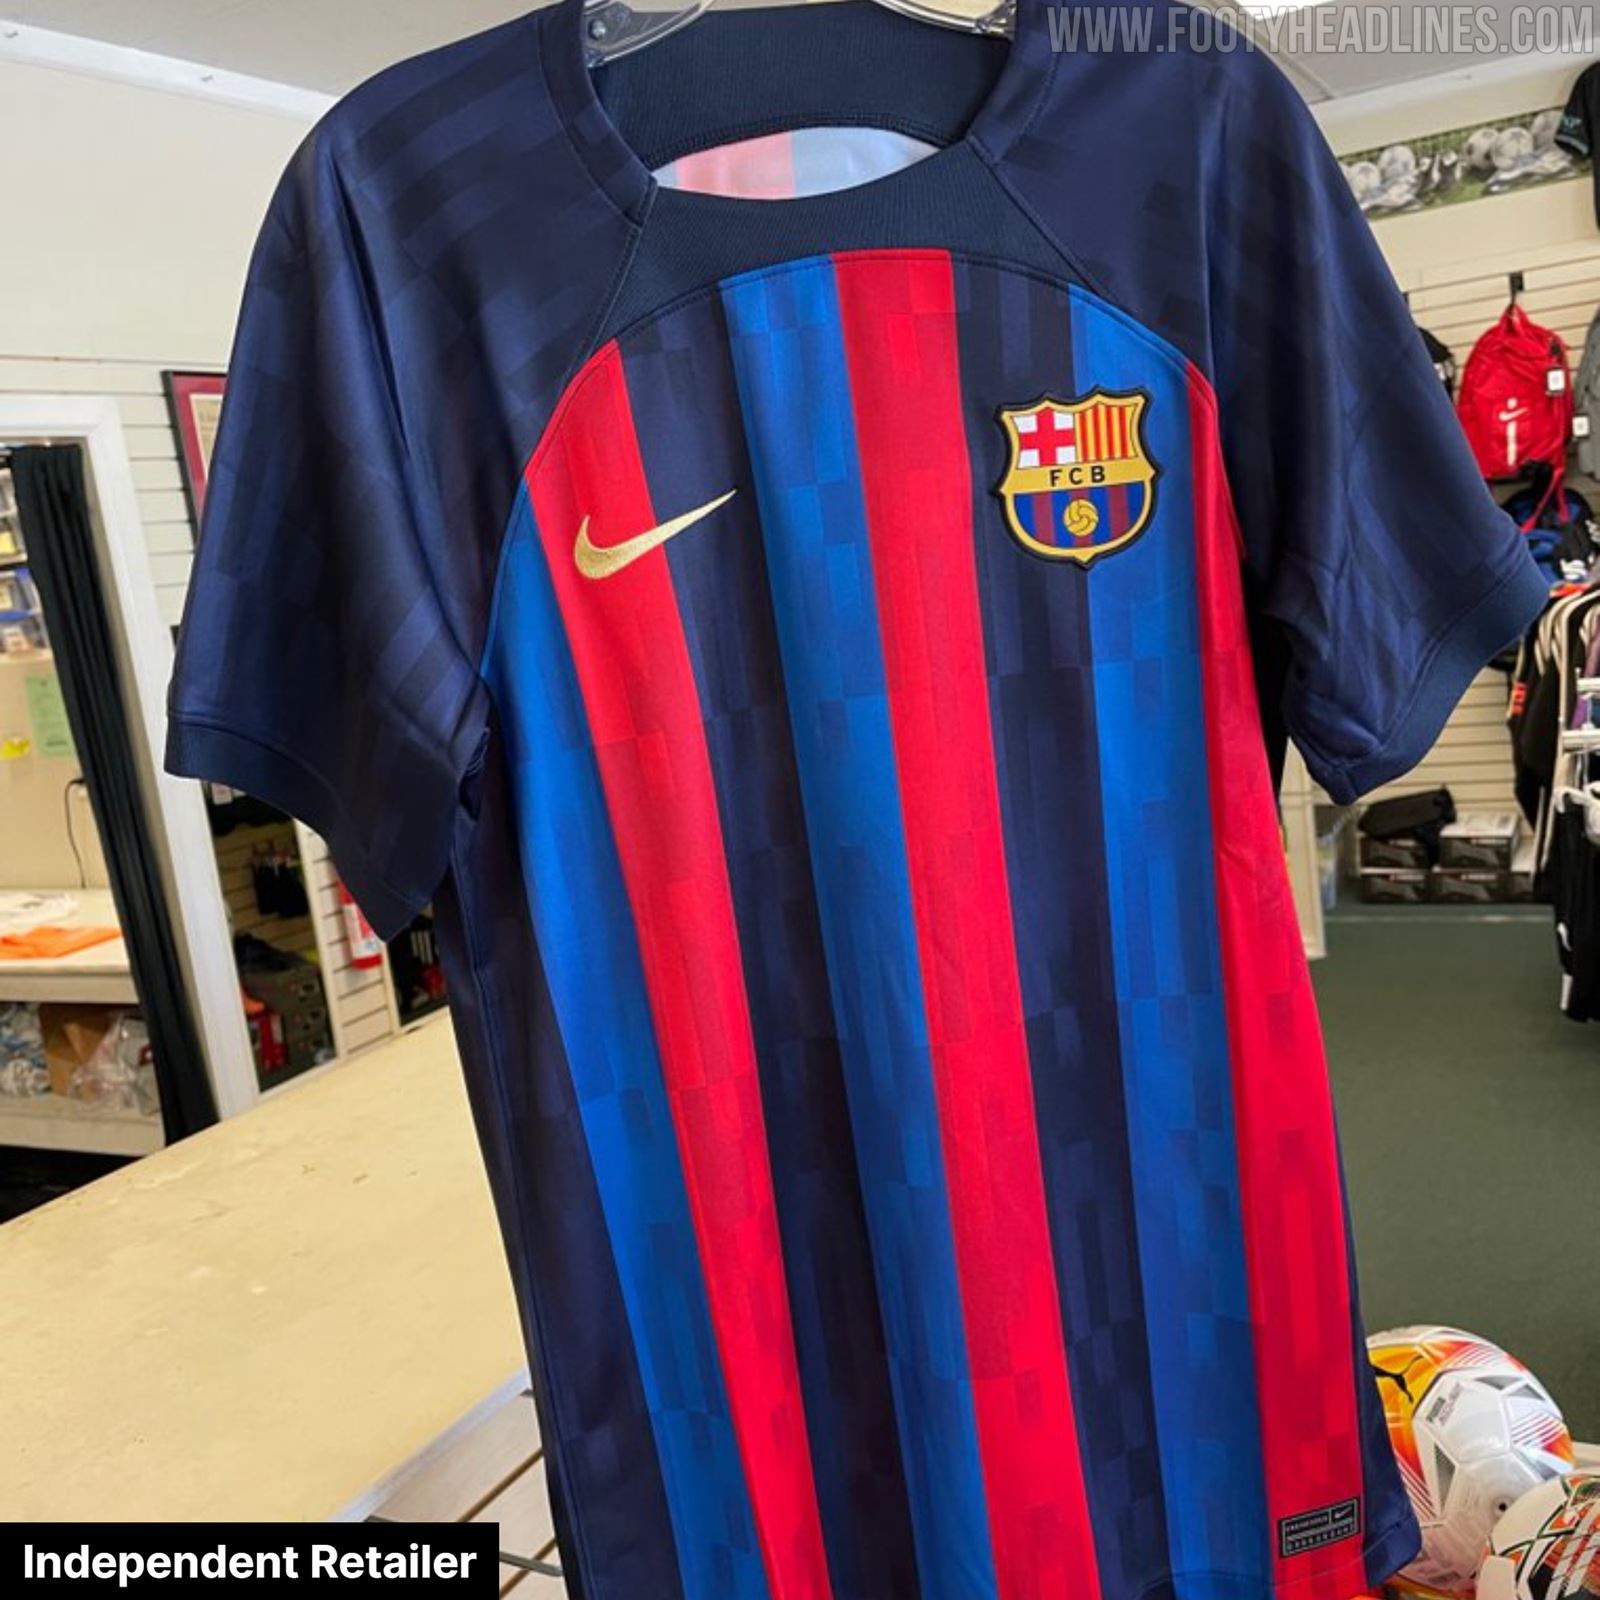 Land Mislukking campagne Confusing: Barcelona 22-23 Kit Is Being Sold With & Without Spotify Logo -  Footy Headlines